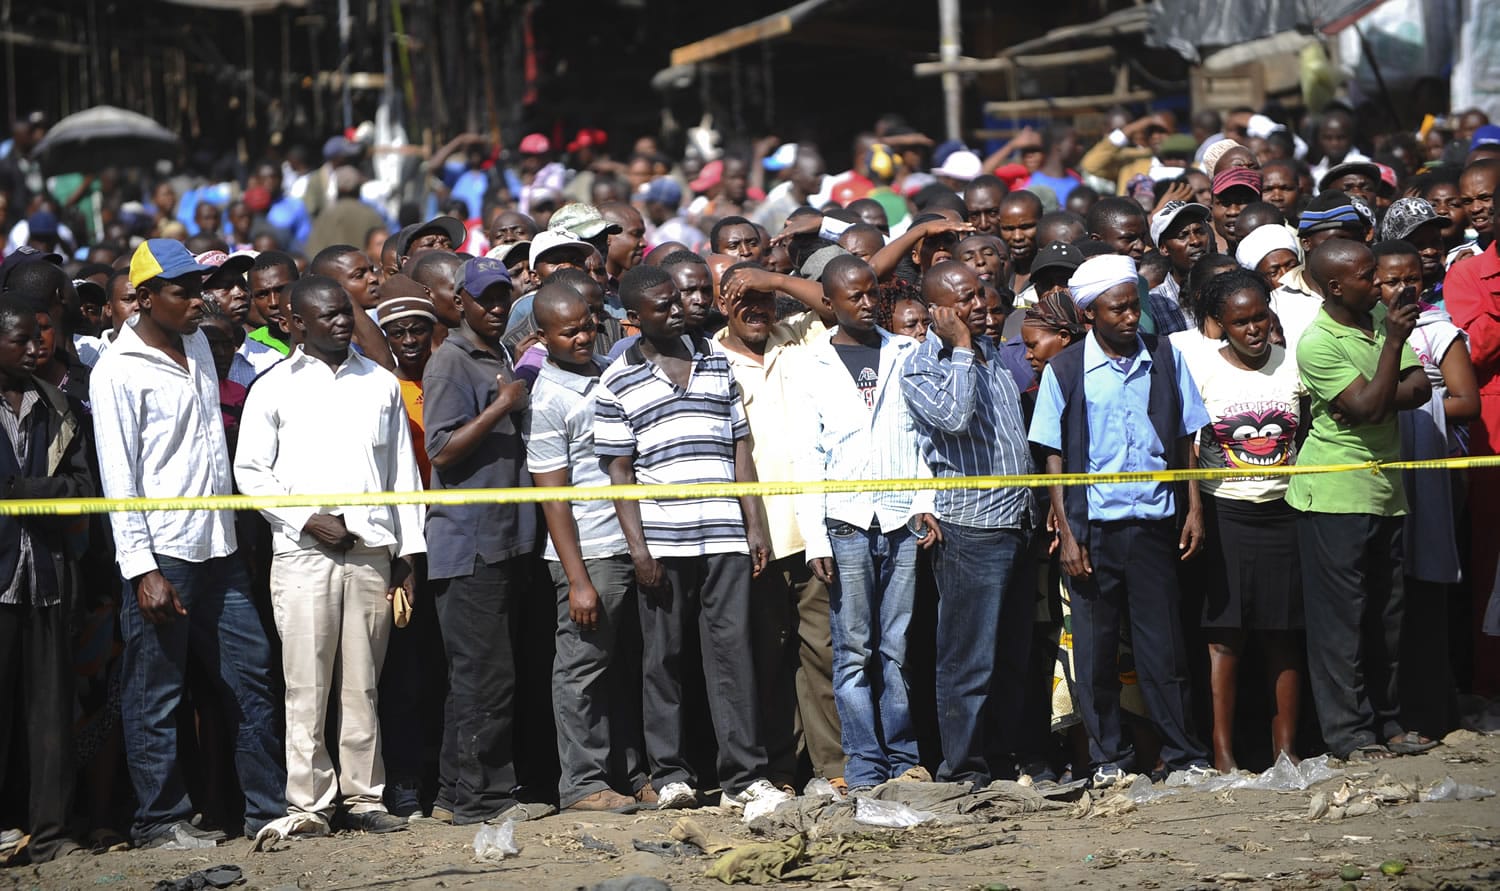 10 dead, 70 wounded amid new Kenya terror alerts - The Columbian